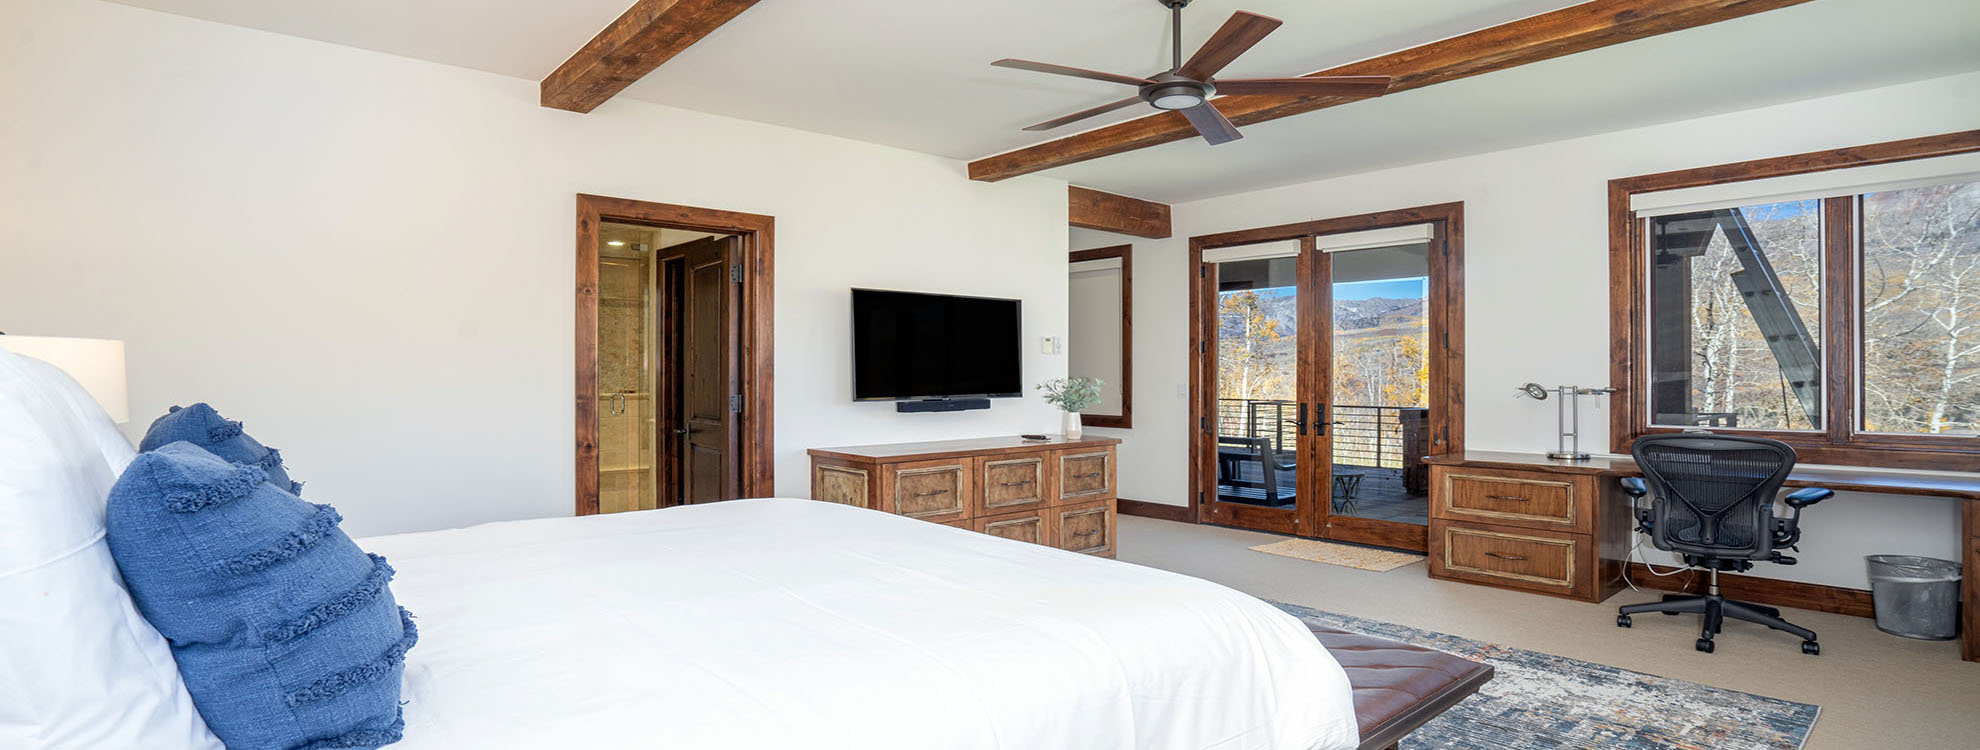 7.1-a-beary-goodlife-mountain-village-guest-suite1-2